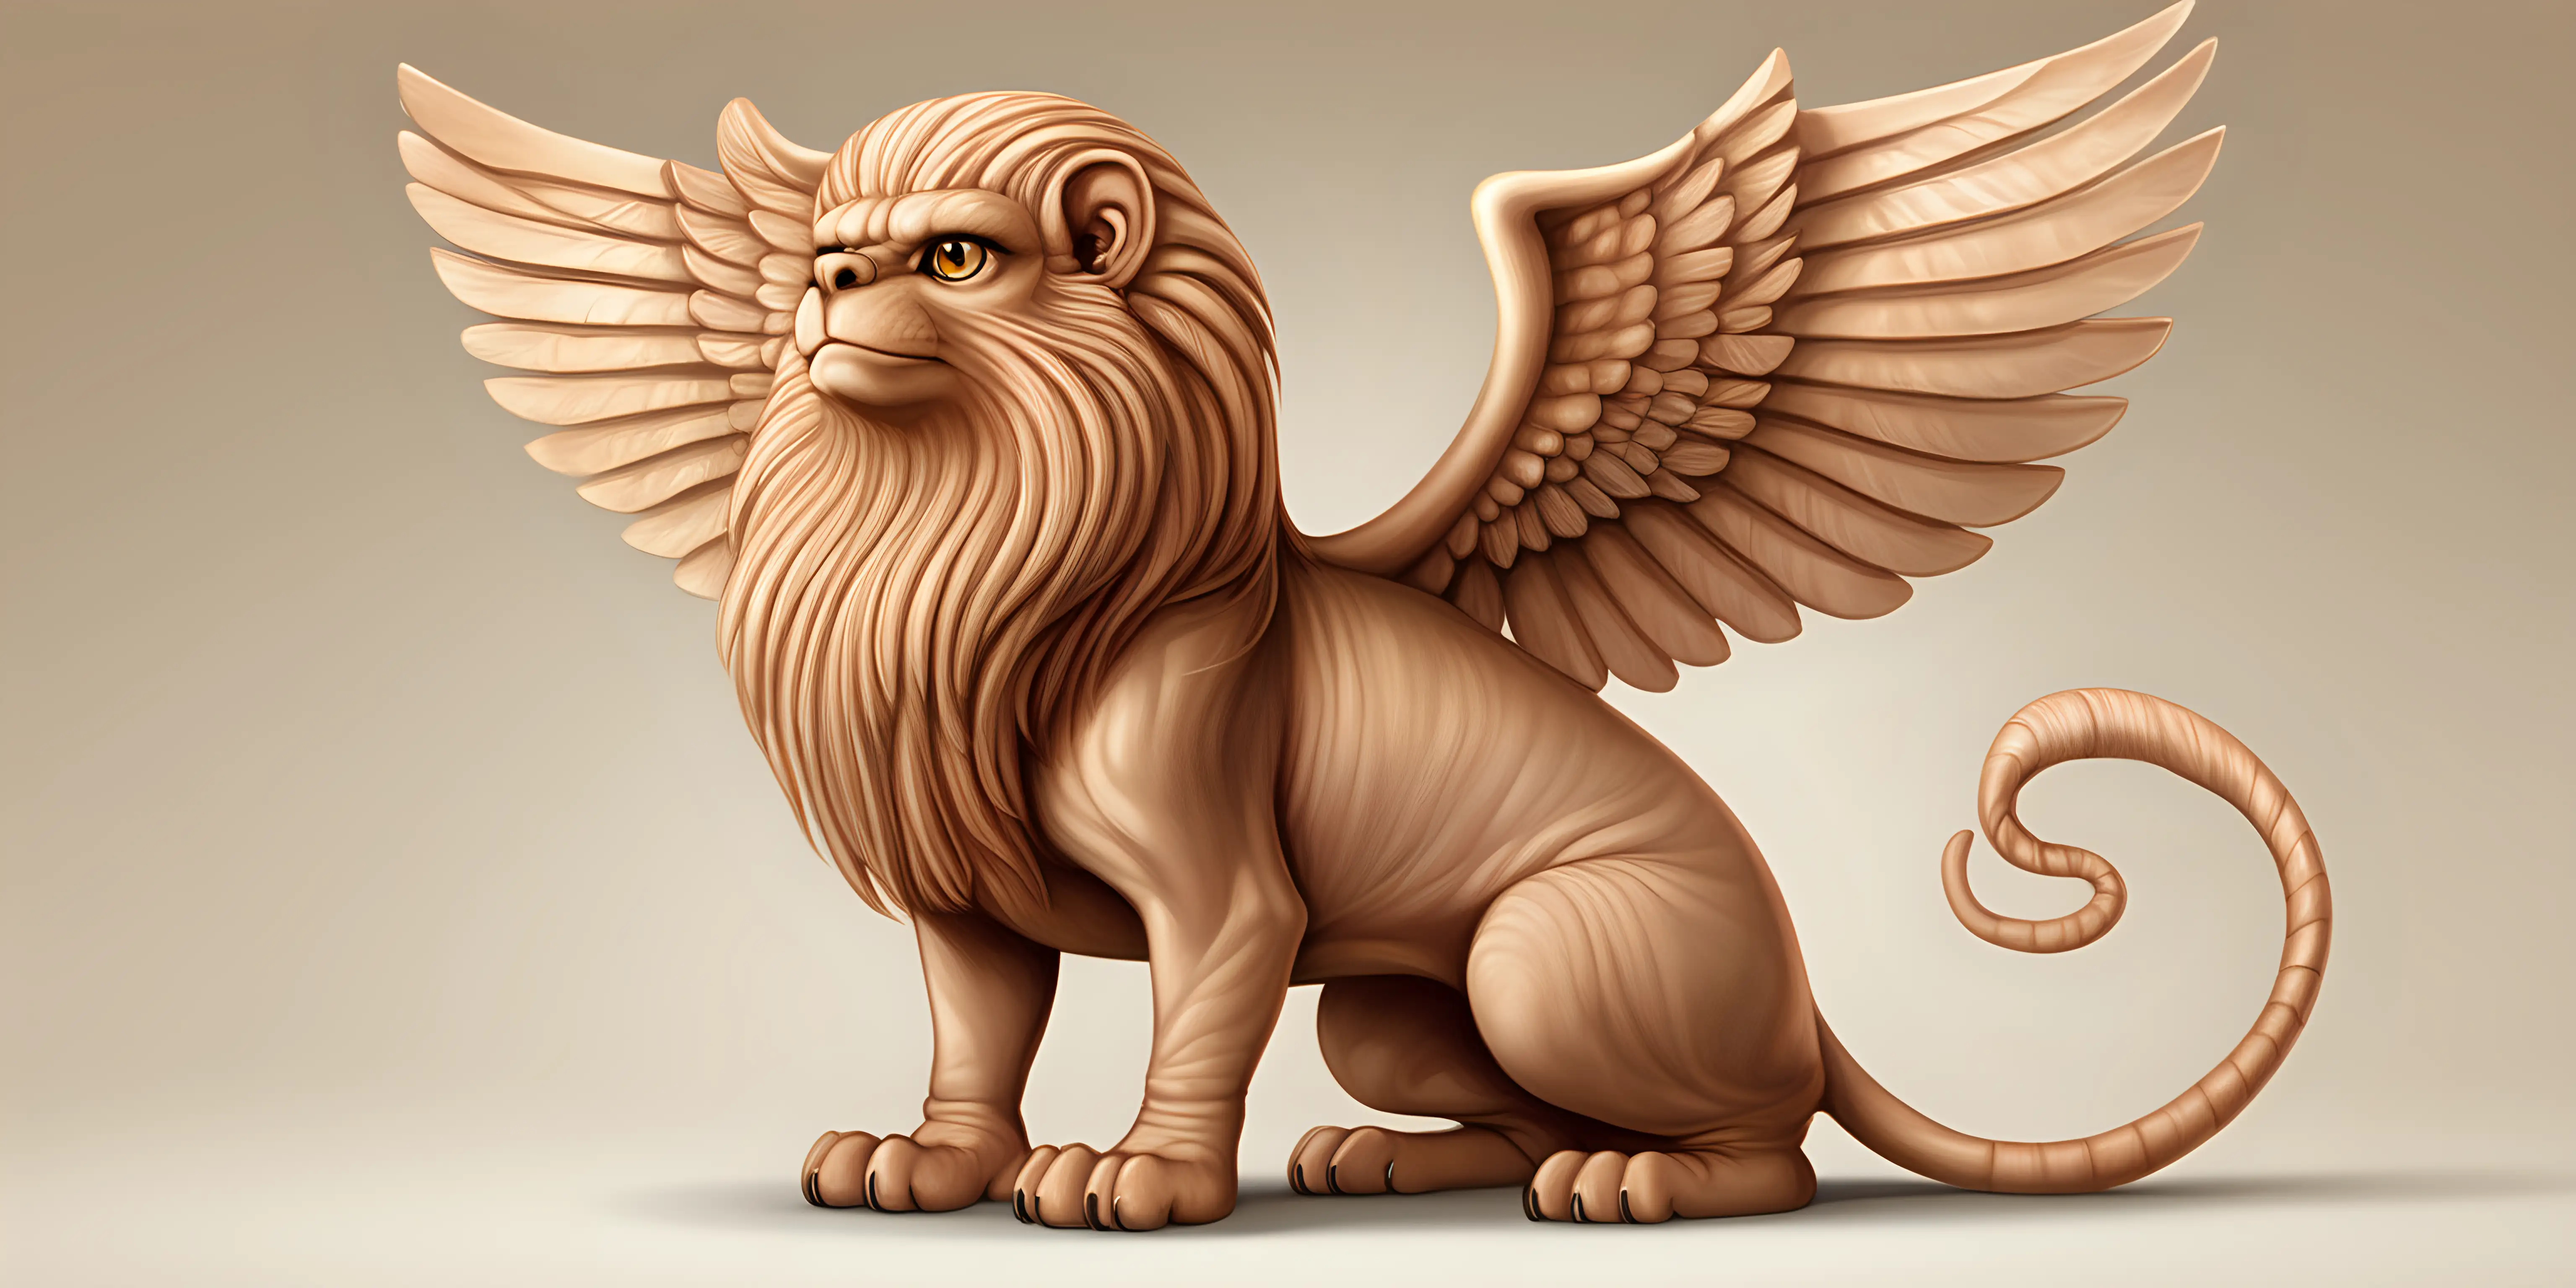 Realistic Cartoon Sphinx on Solid Background